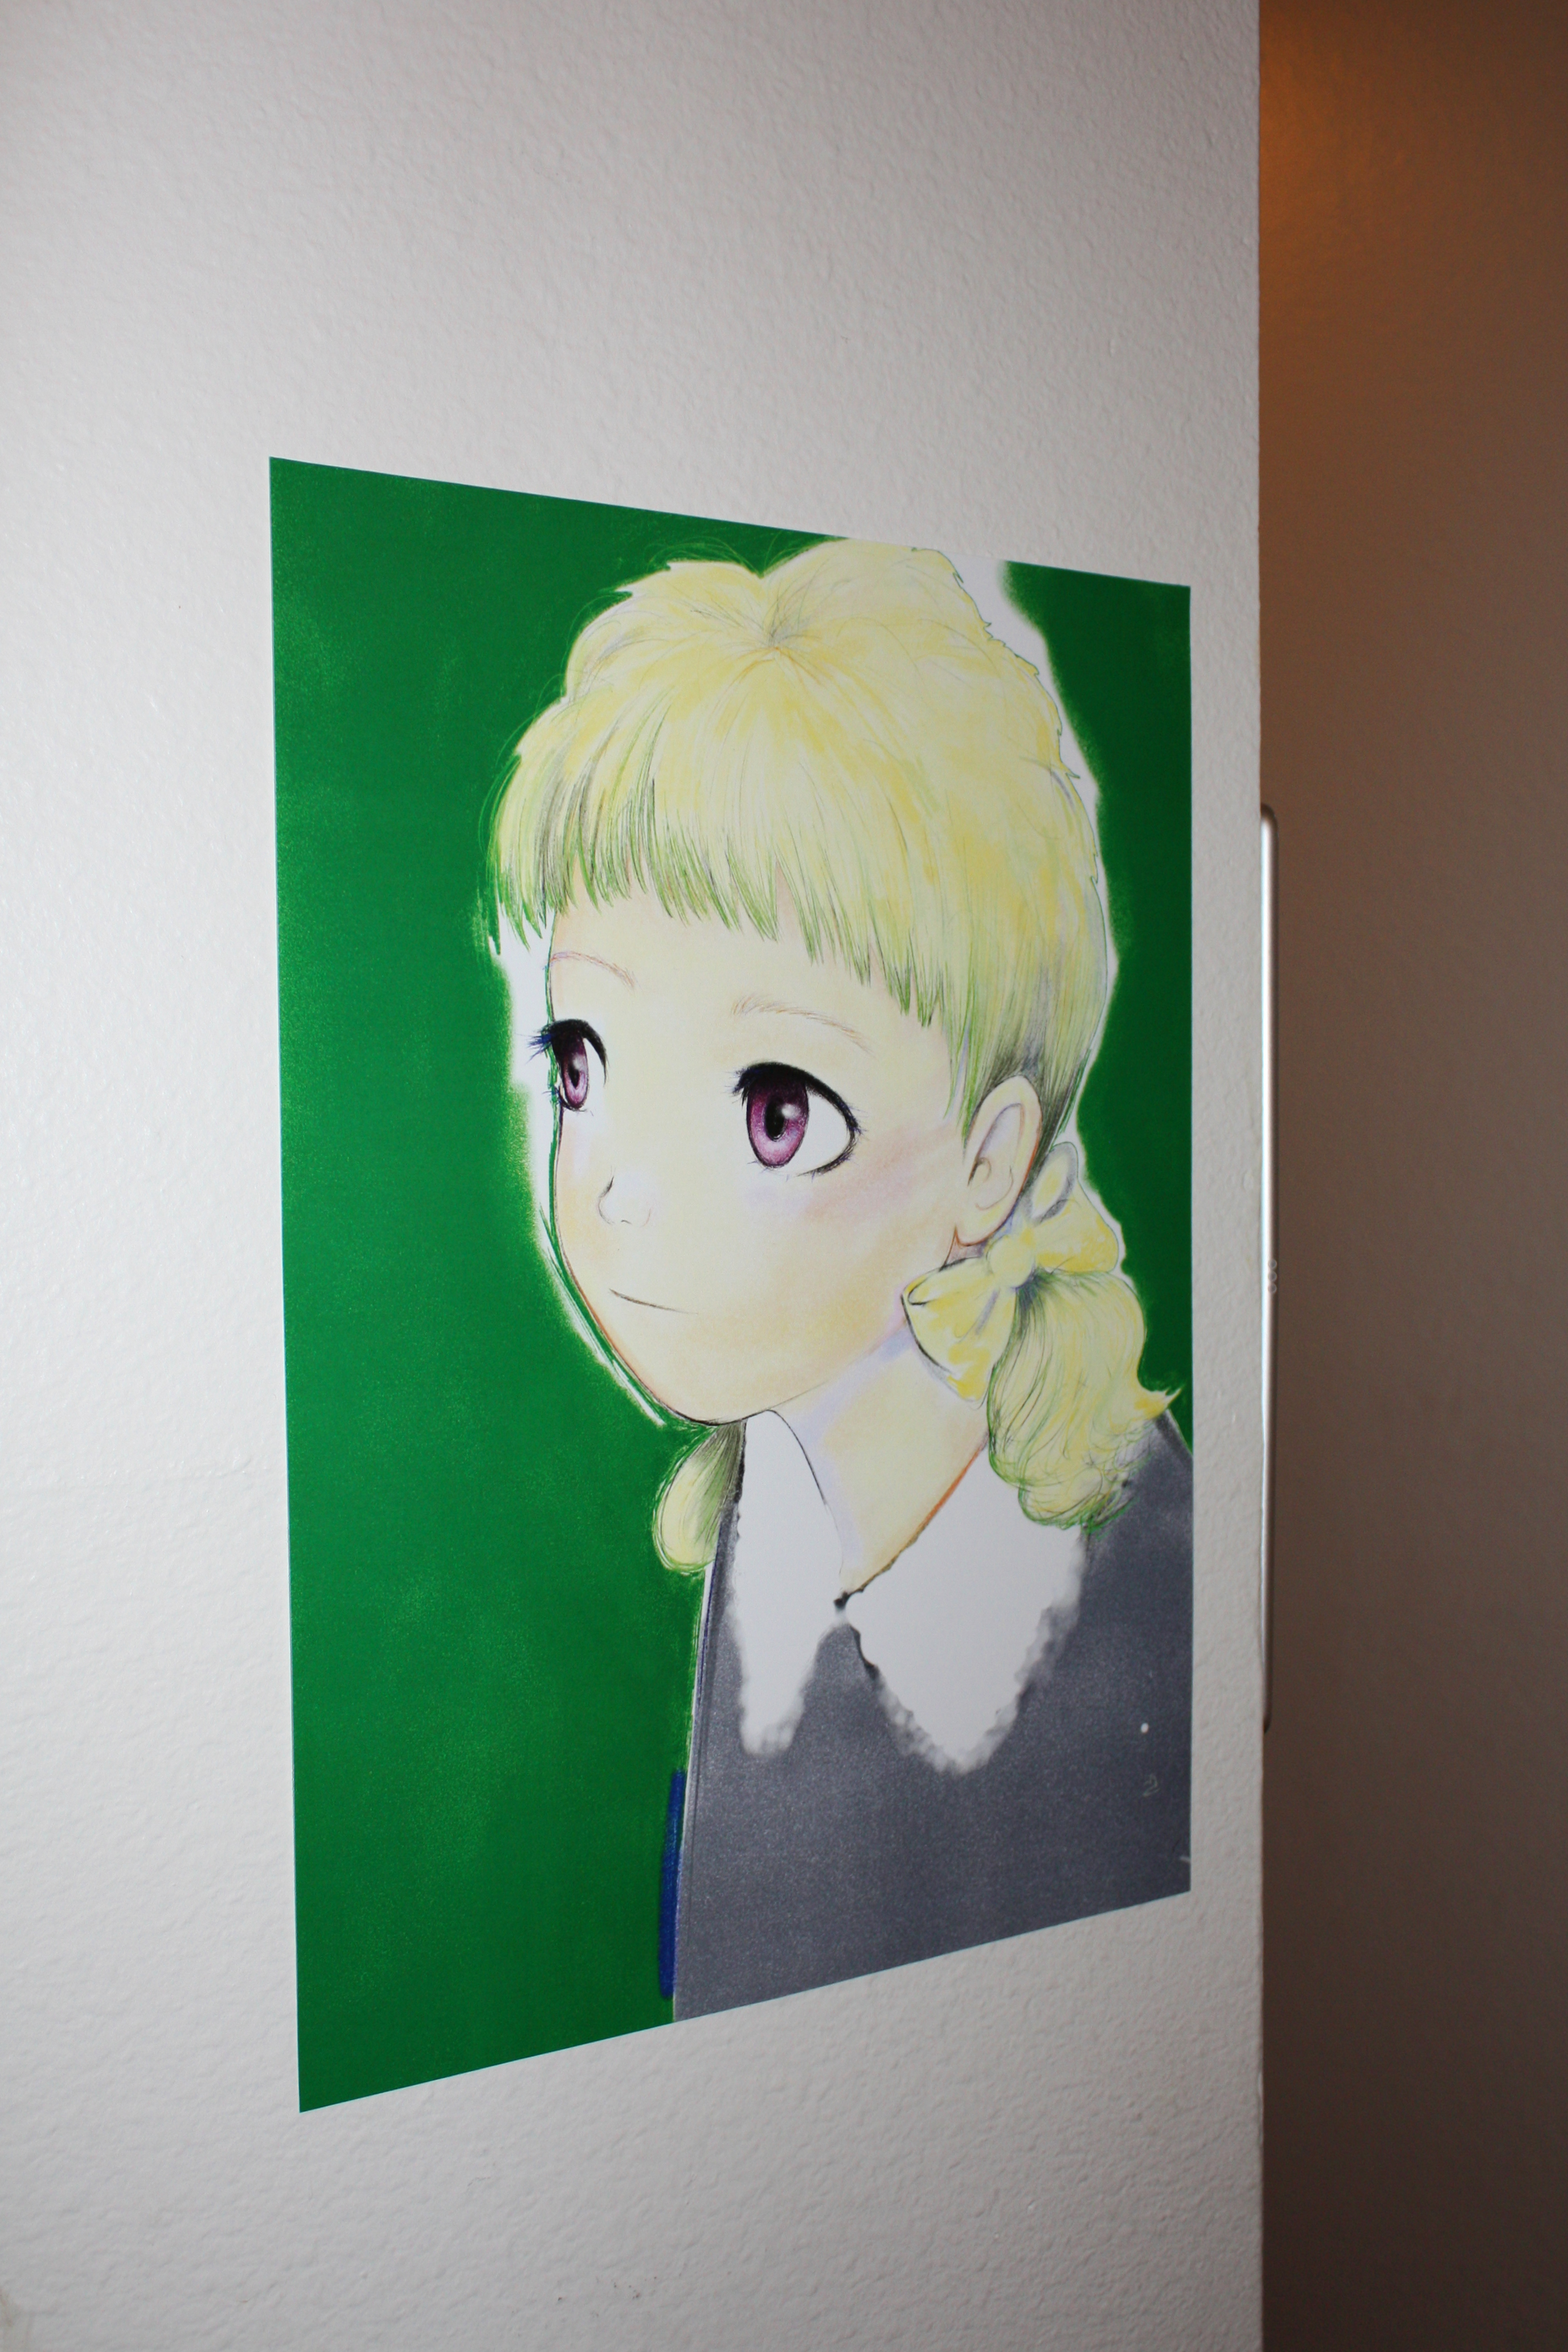 Detail of an anime girl with blonde hair hung on a white wall